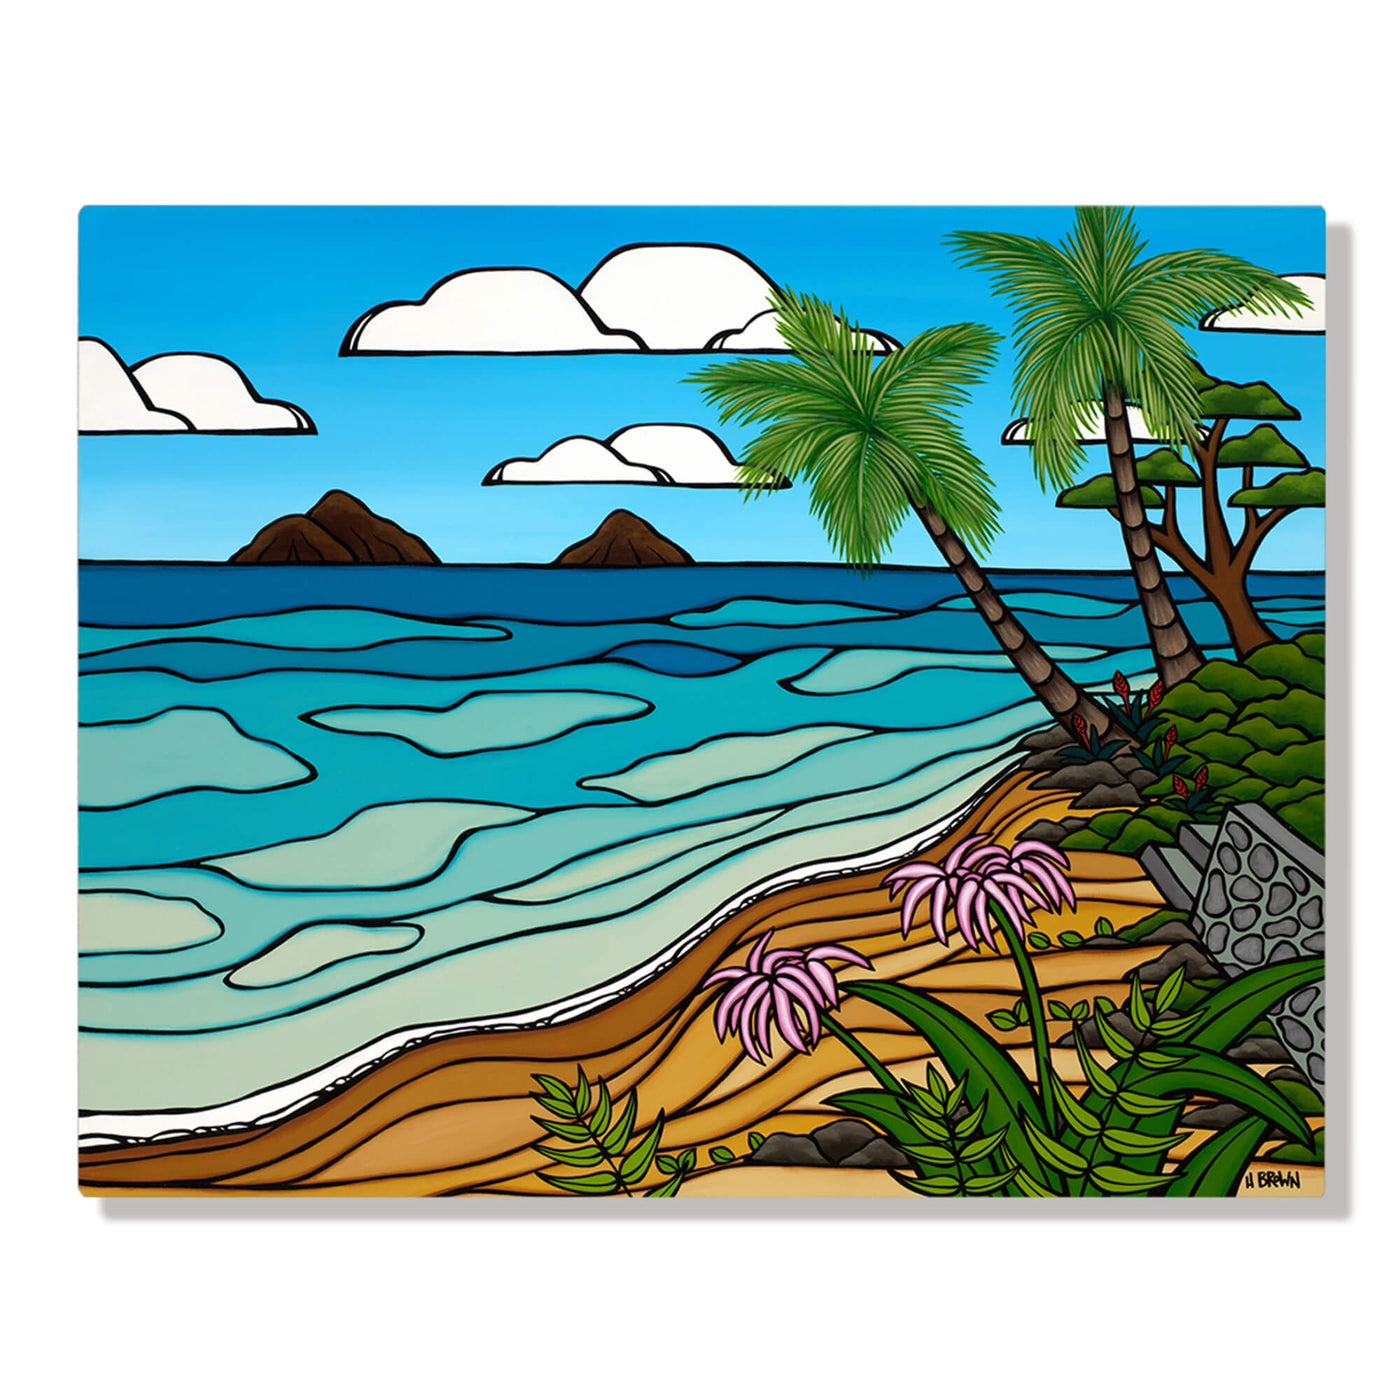 Seascape with distant islands by Hawaii surf artist Heather Brown